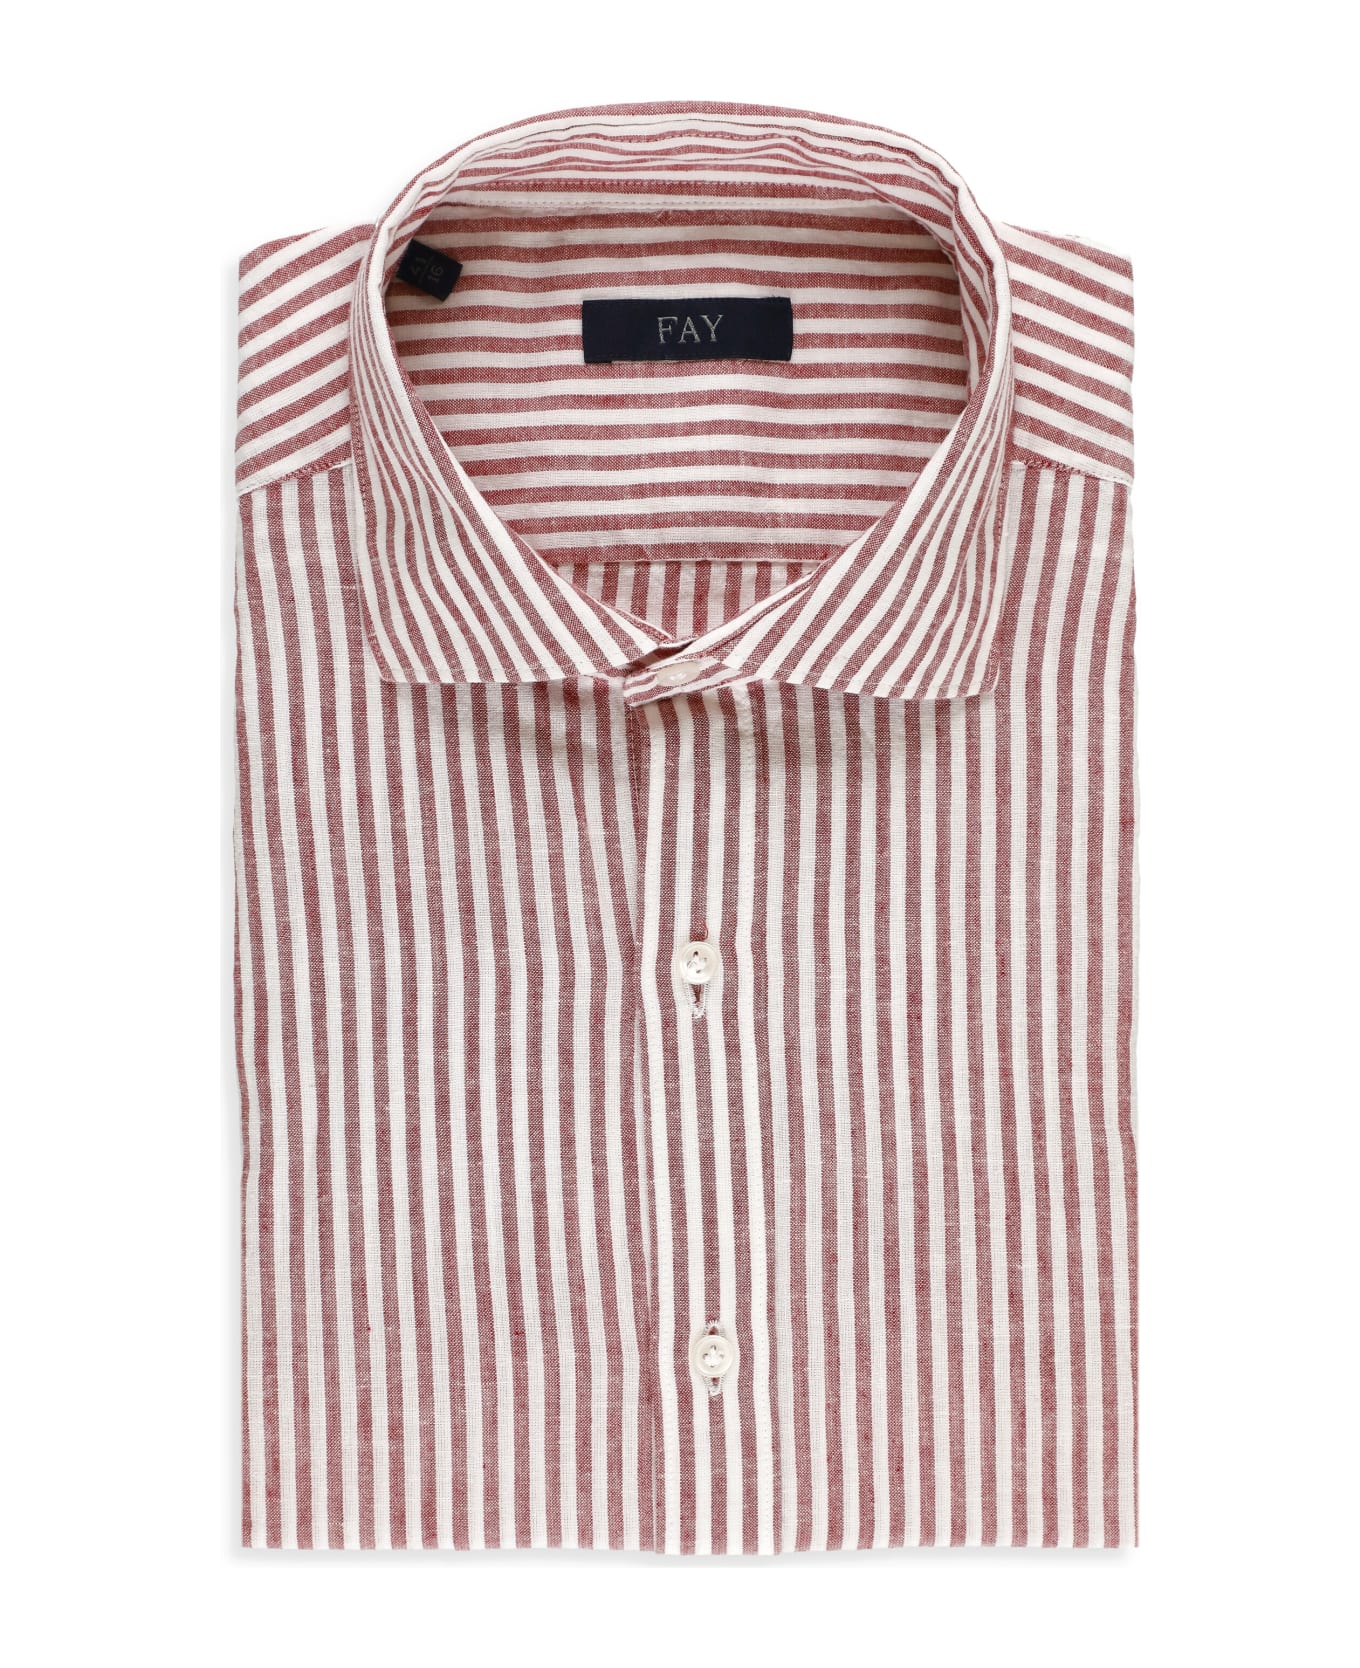 Fay Striped Shirt - Red